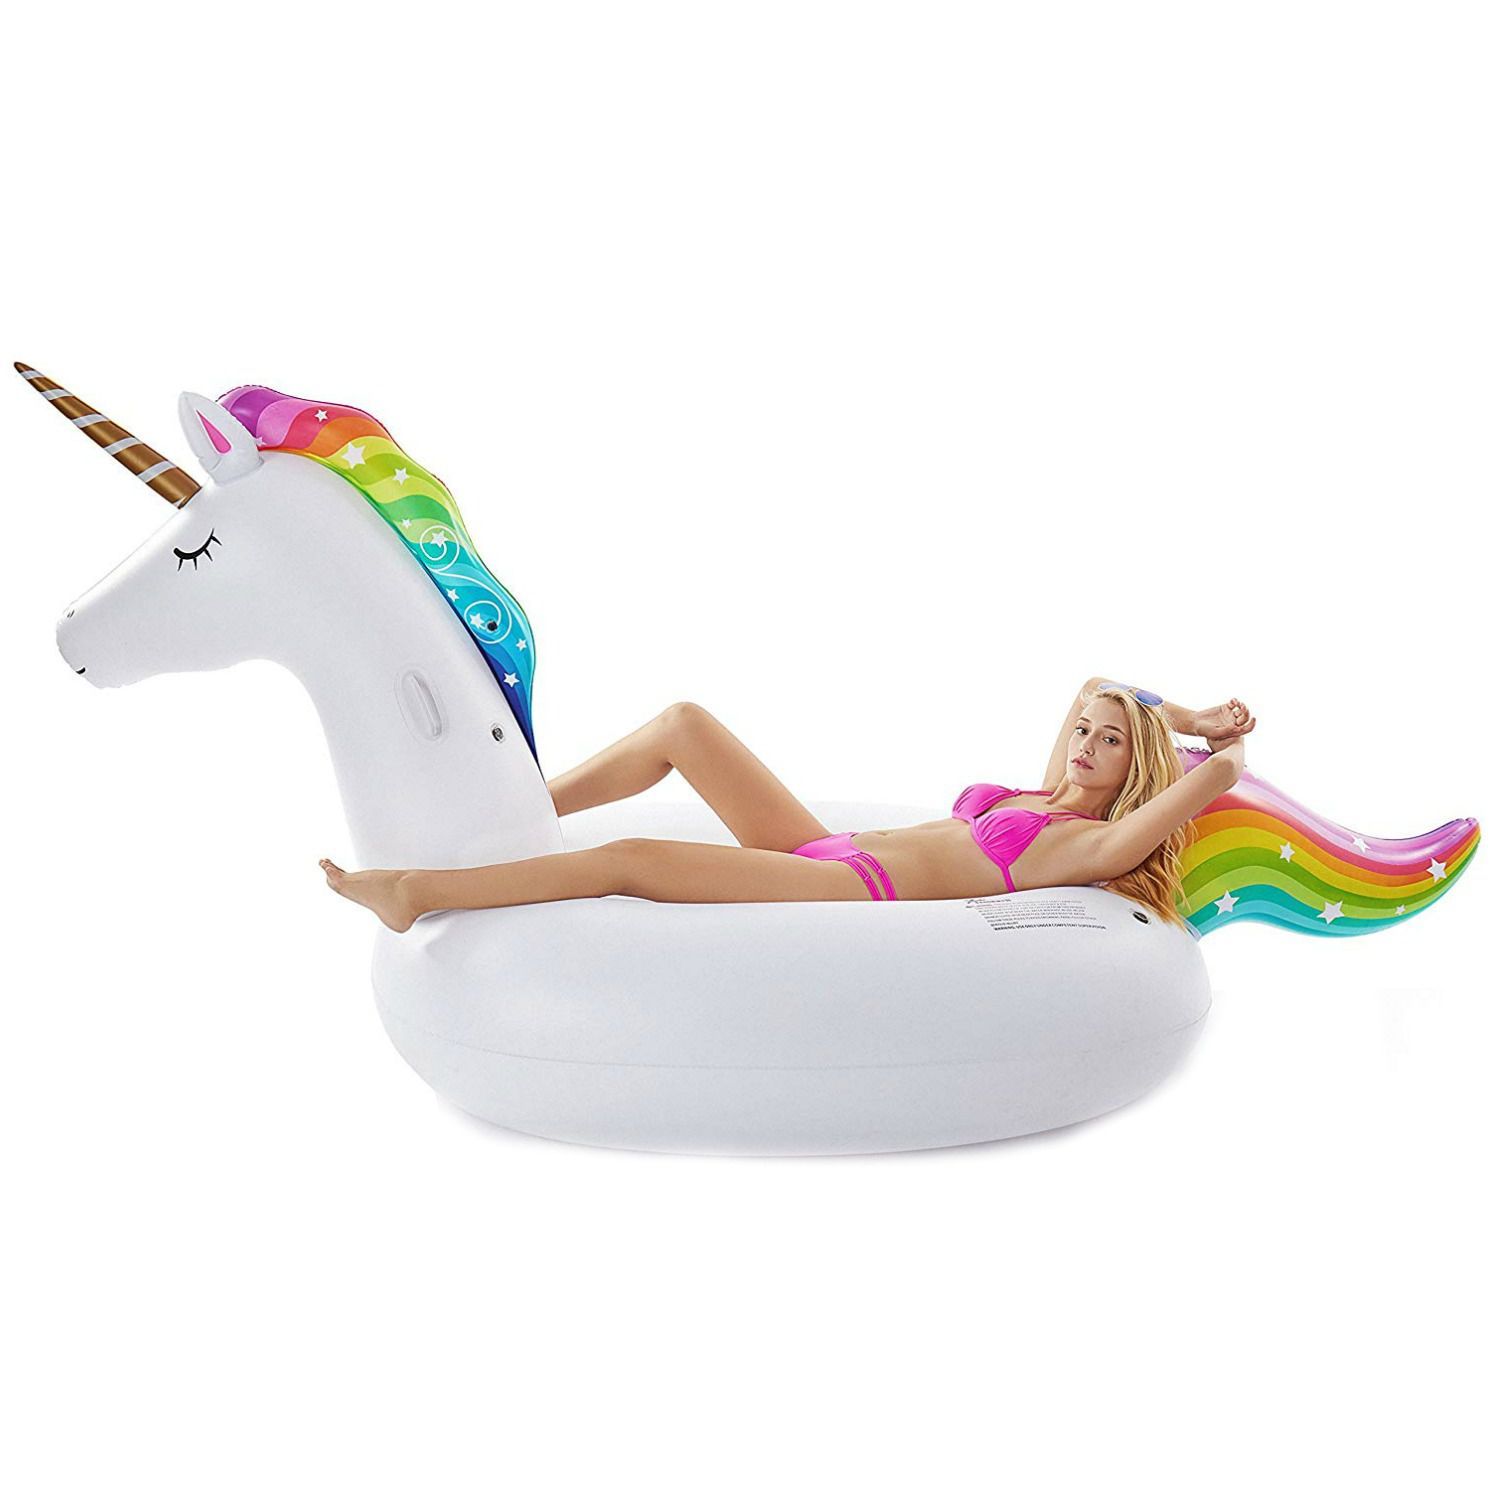 20 Best Unicorn Gifts For 2019 Cool Unicorn Toys Gifts - roblox mythical unicorn toy amazon